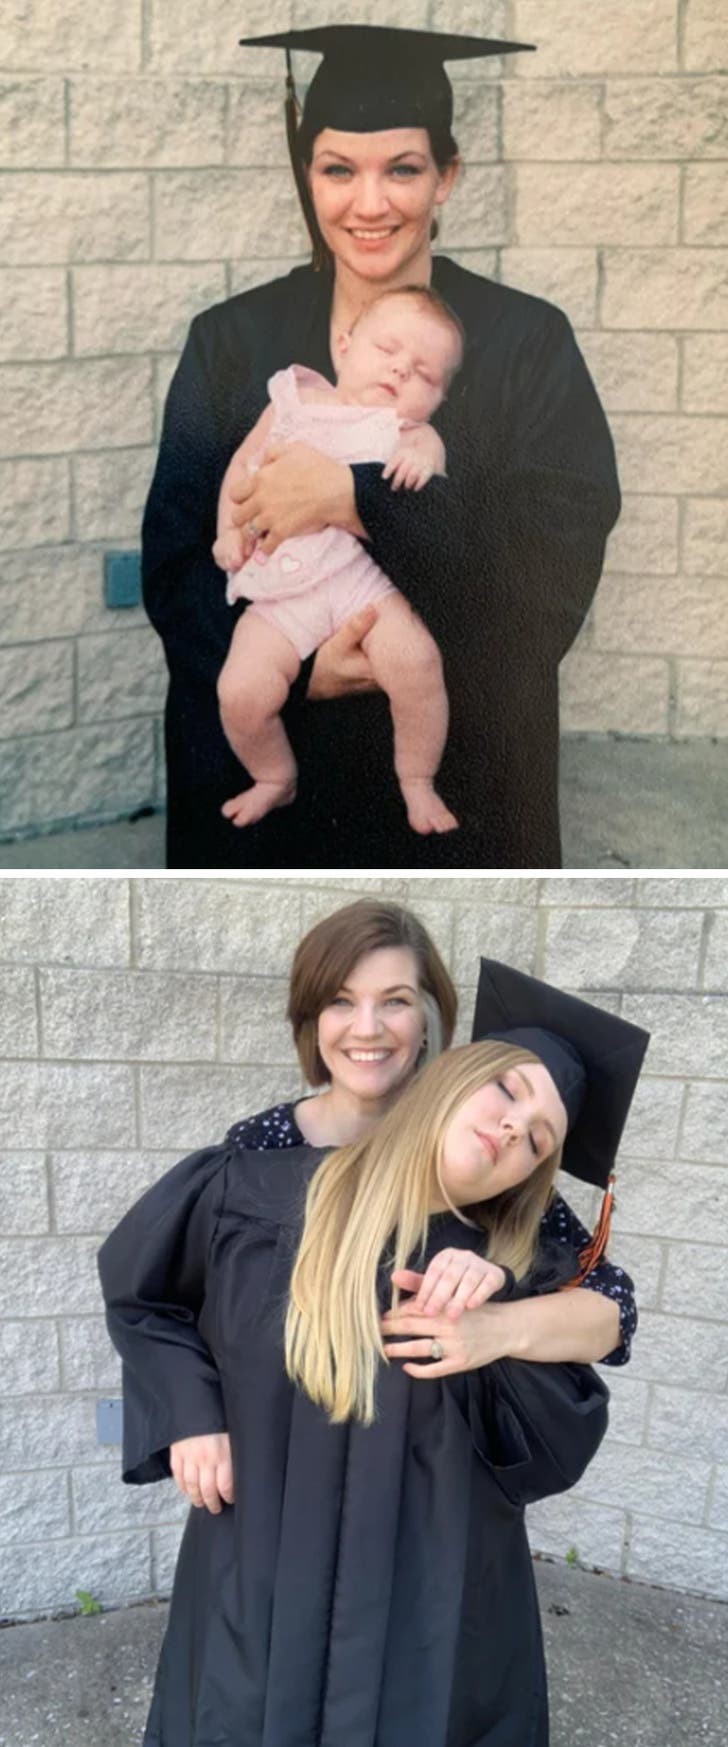 1. "In the first photo it's me on graduation day, holding my daughter in my arms ... in the second photo it's my daughter who graduated!"